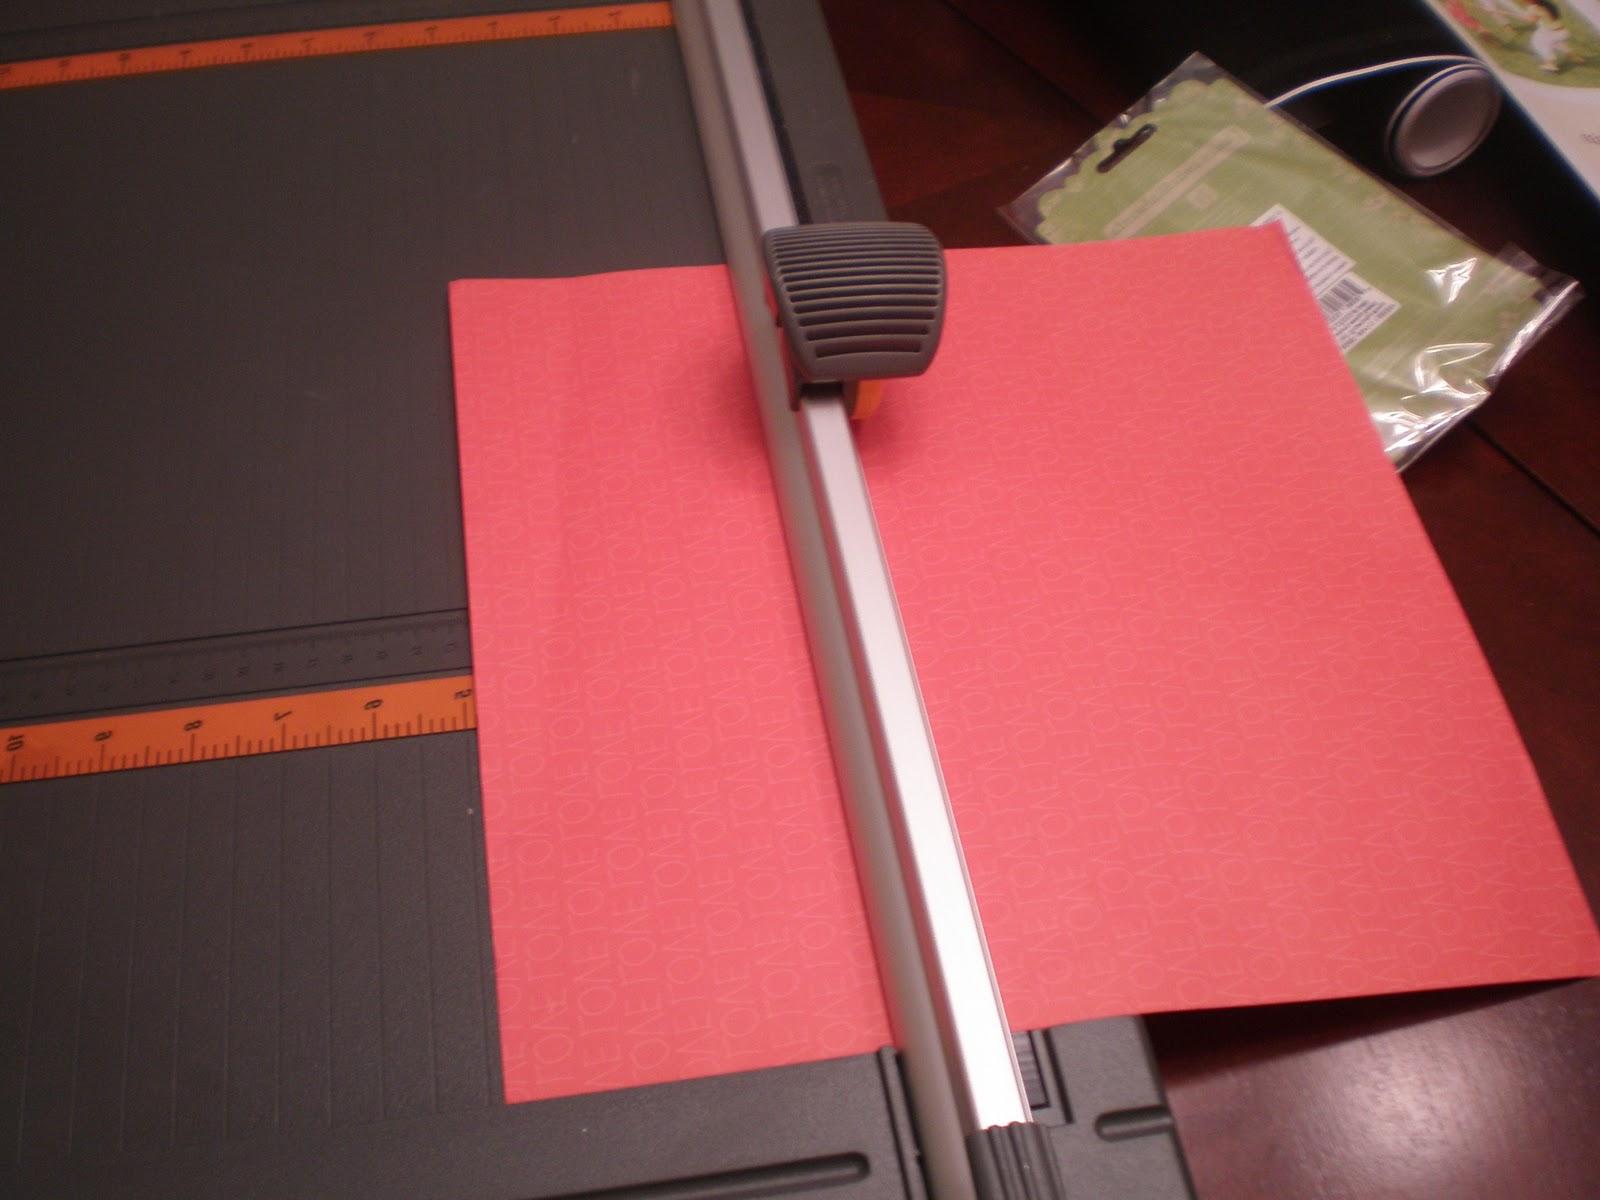 My tools were my paper cutter,